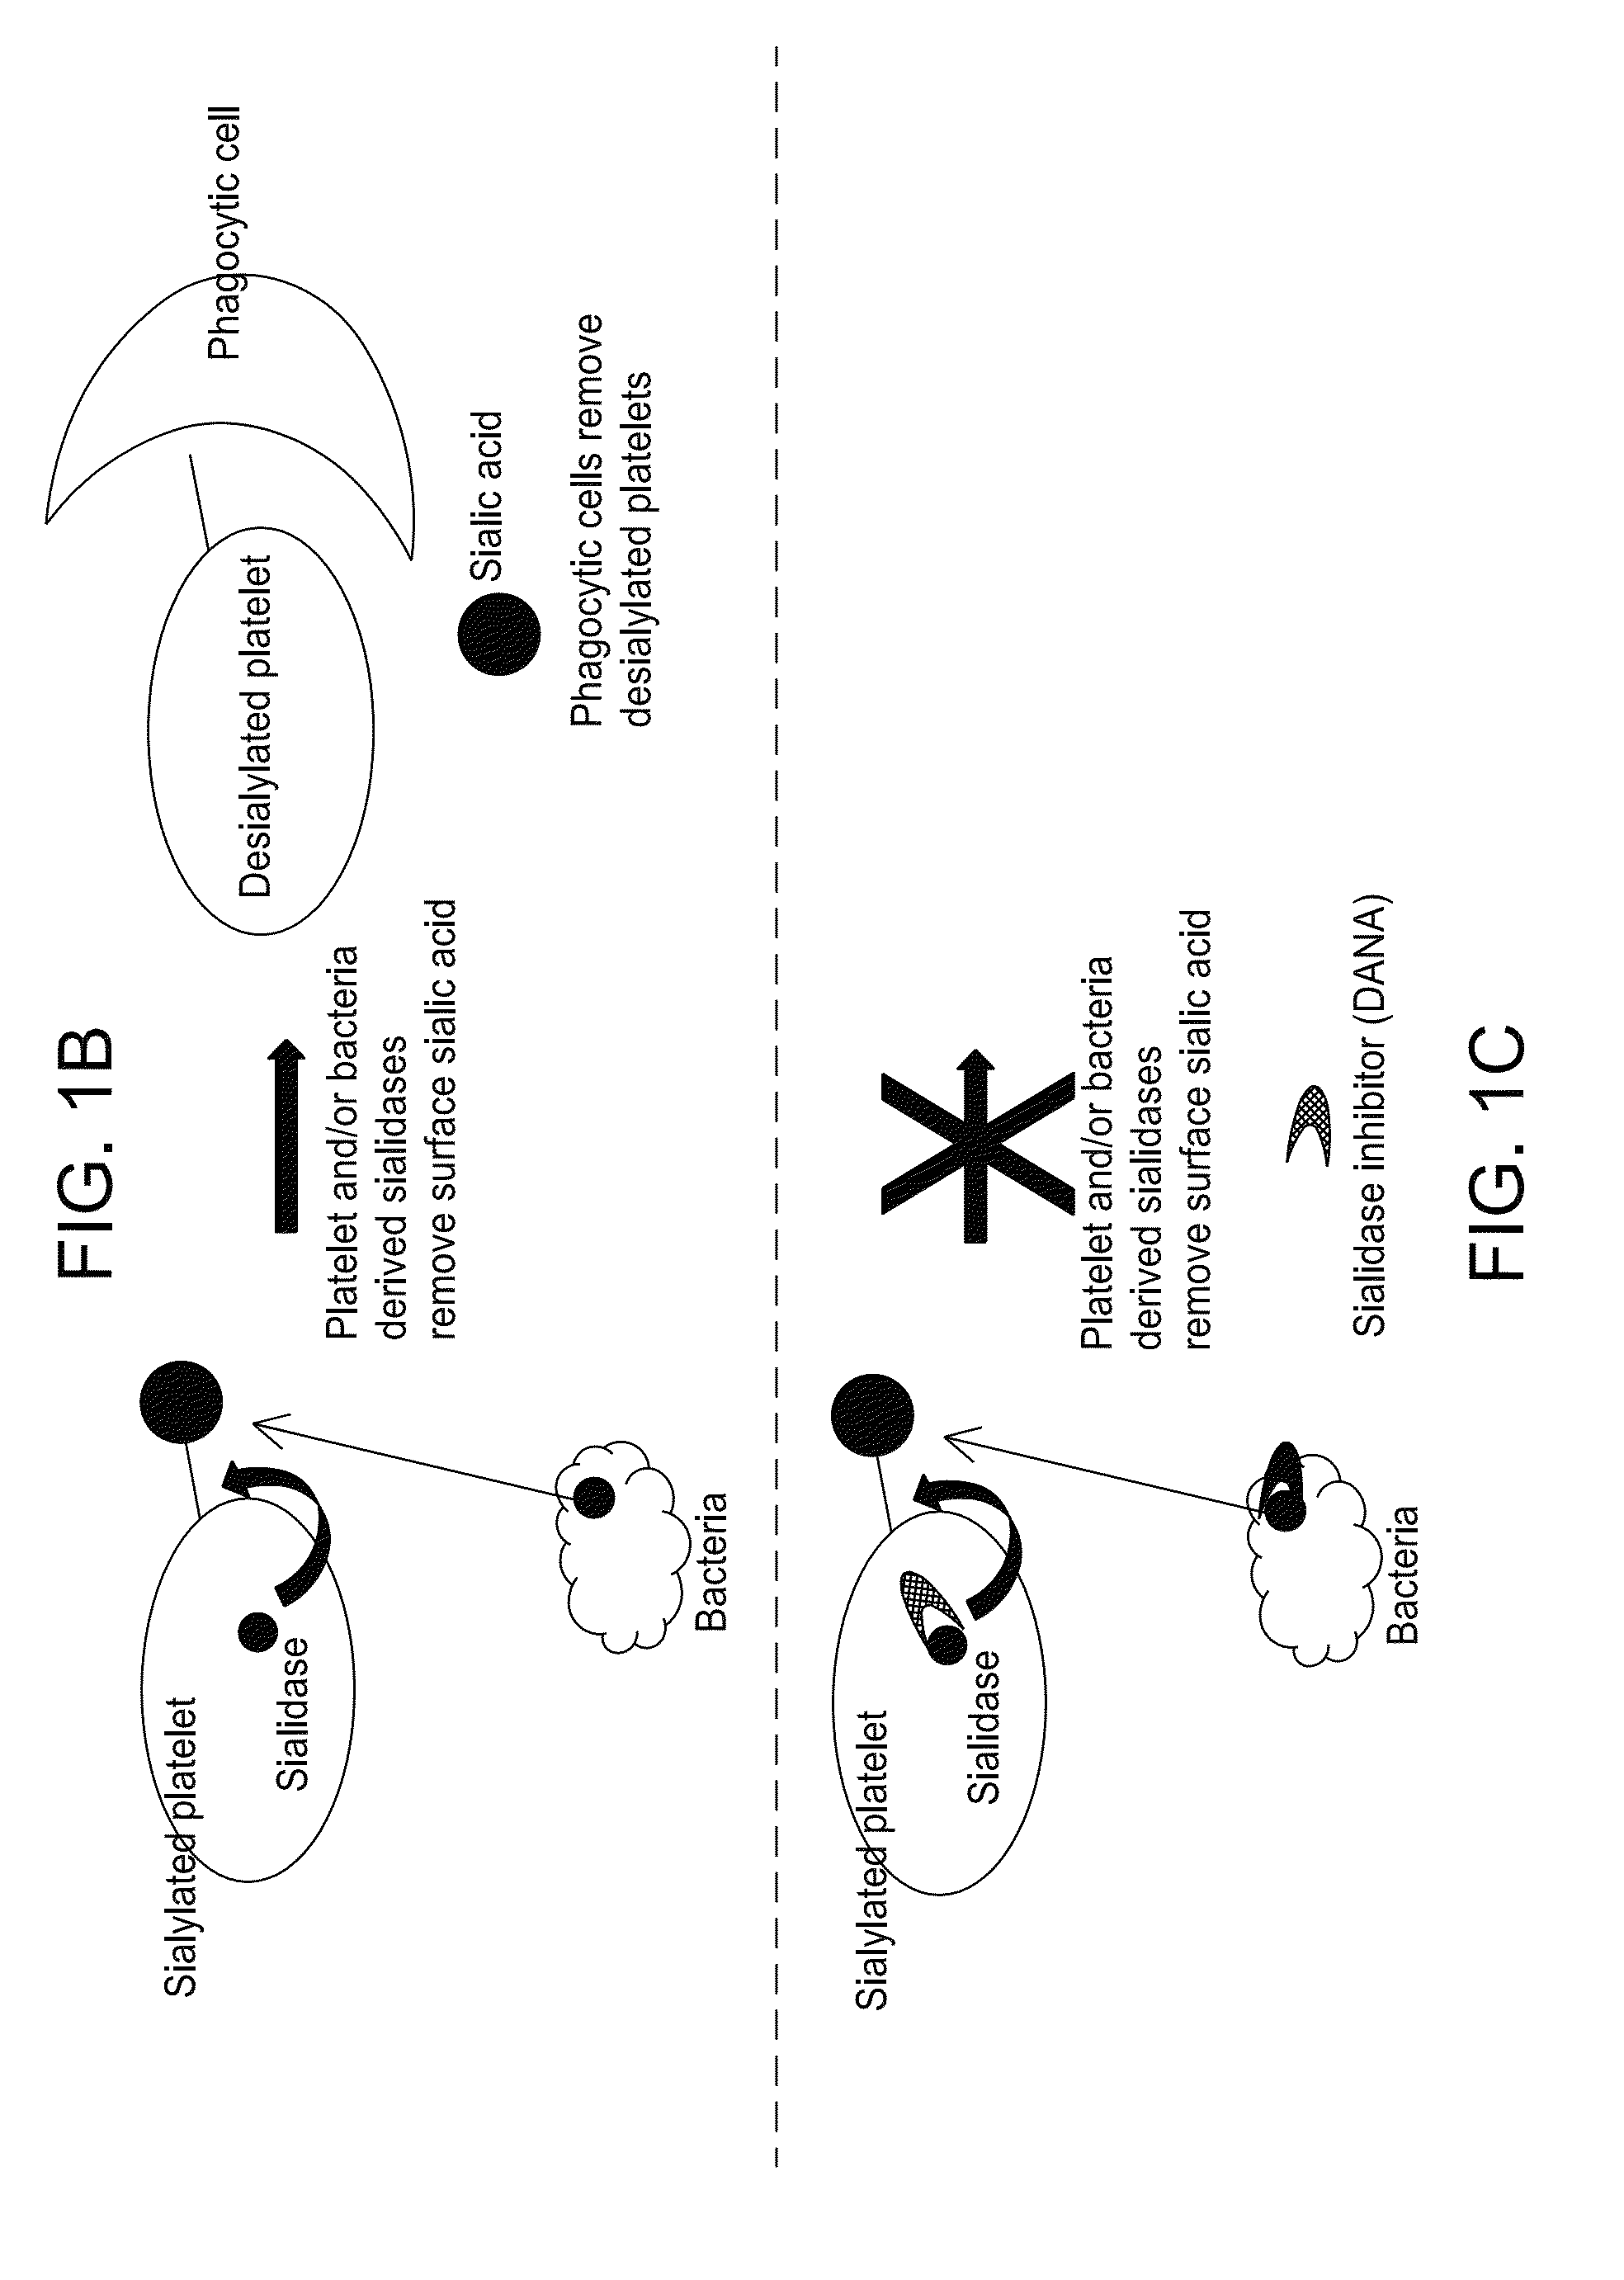 Platelet Storage and Reduced Bacterial Proliferation in Platelet Products Using a Sialidase Inhibitor